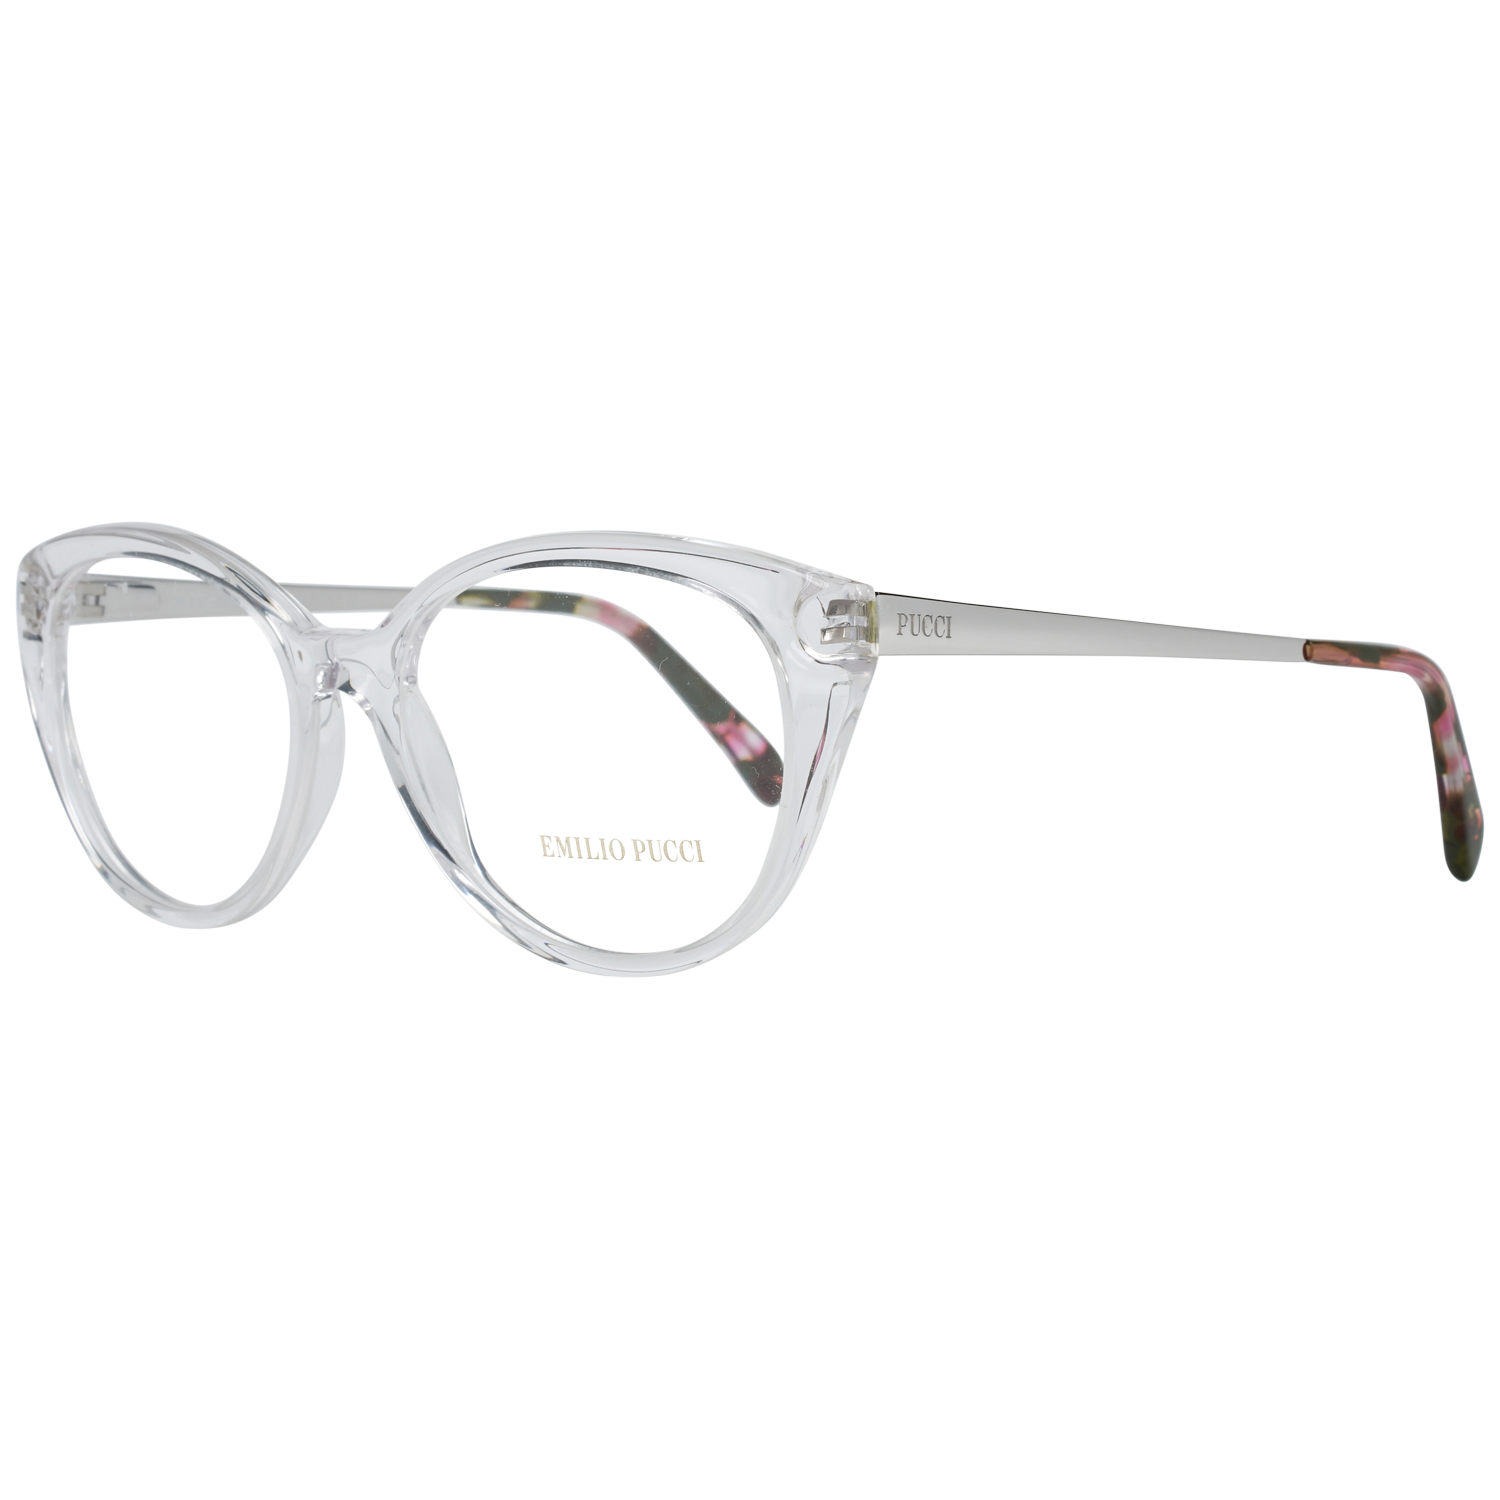 Emilio Pucci Optical Frame EP5063 026 53 Women
Frame color: Transparent
Lenses width: 53
Lenses heigth: 41
Bridge length: 16
Frame width: 133
Temple length: 140
Shipment includes: Case, Cleaning cloth
Style: Full-Rim
Spring hinge: Yes